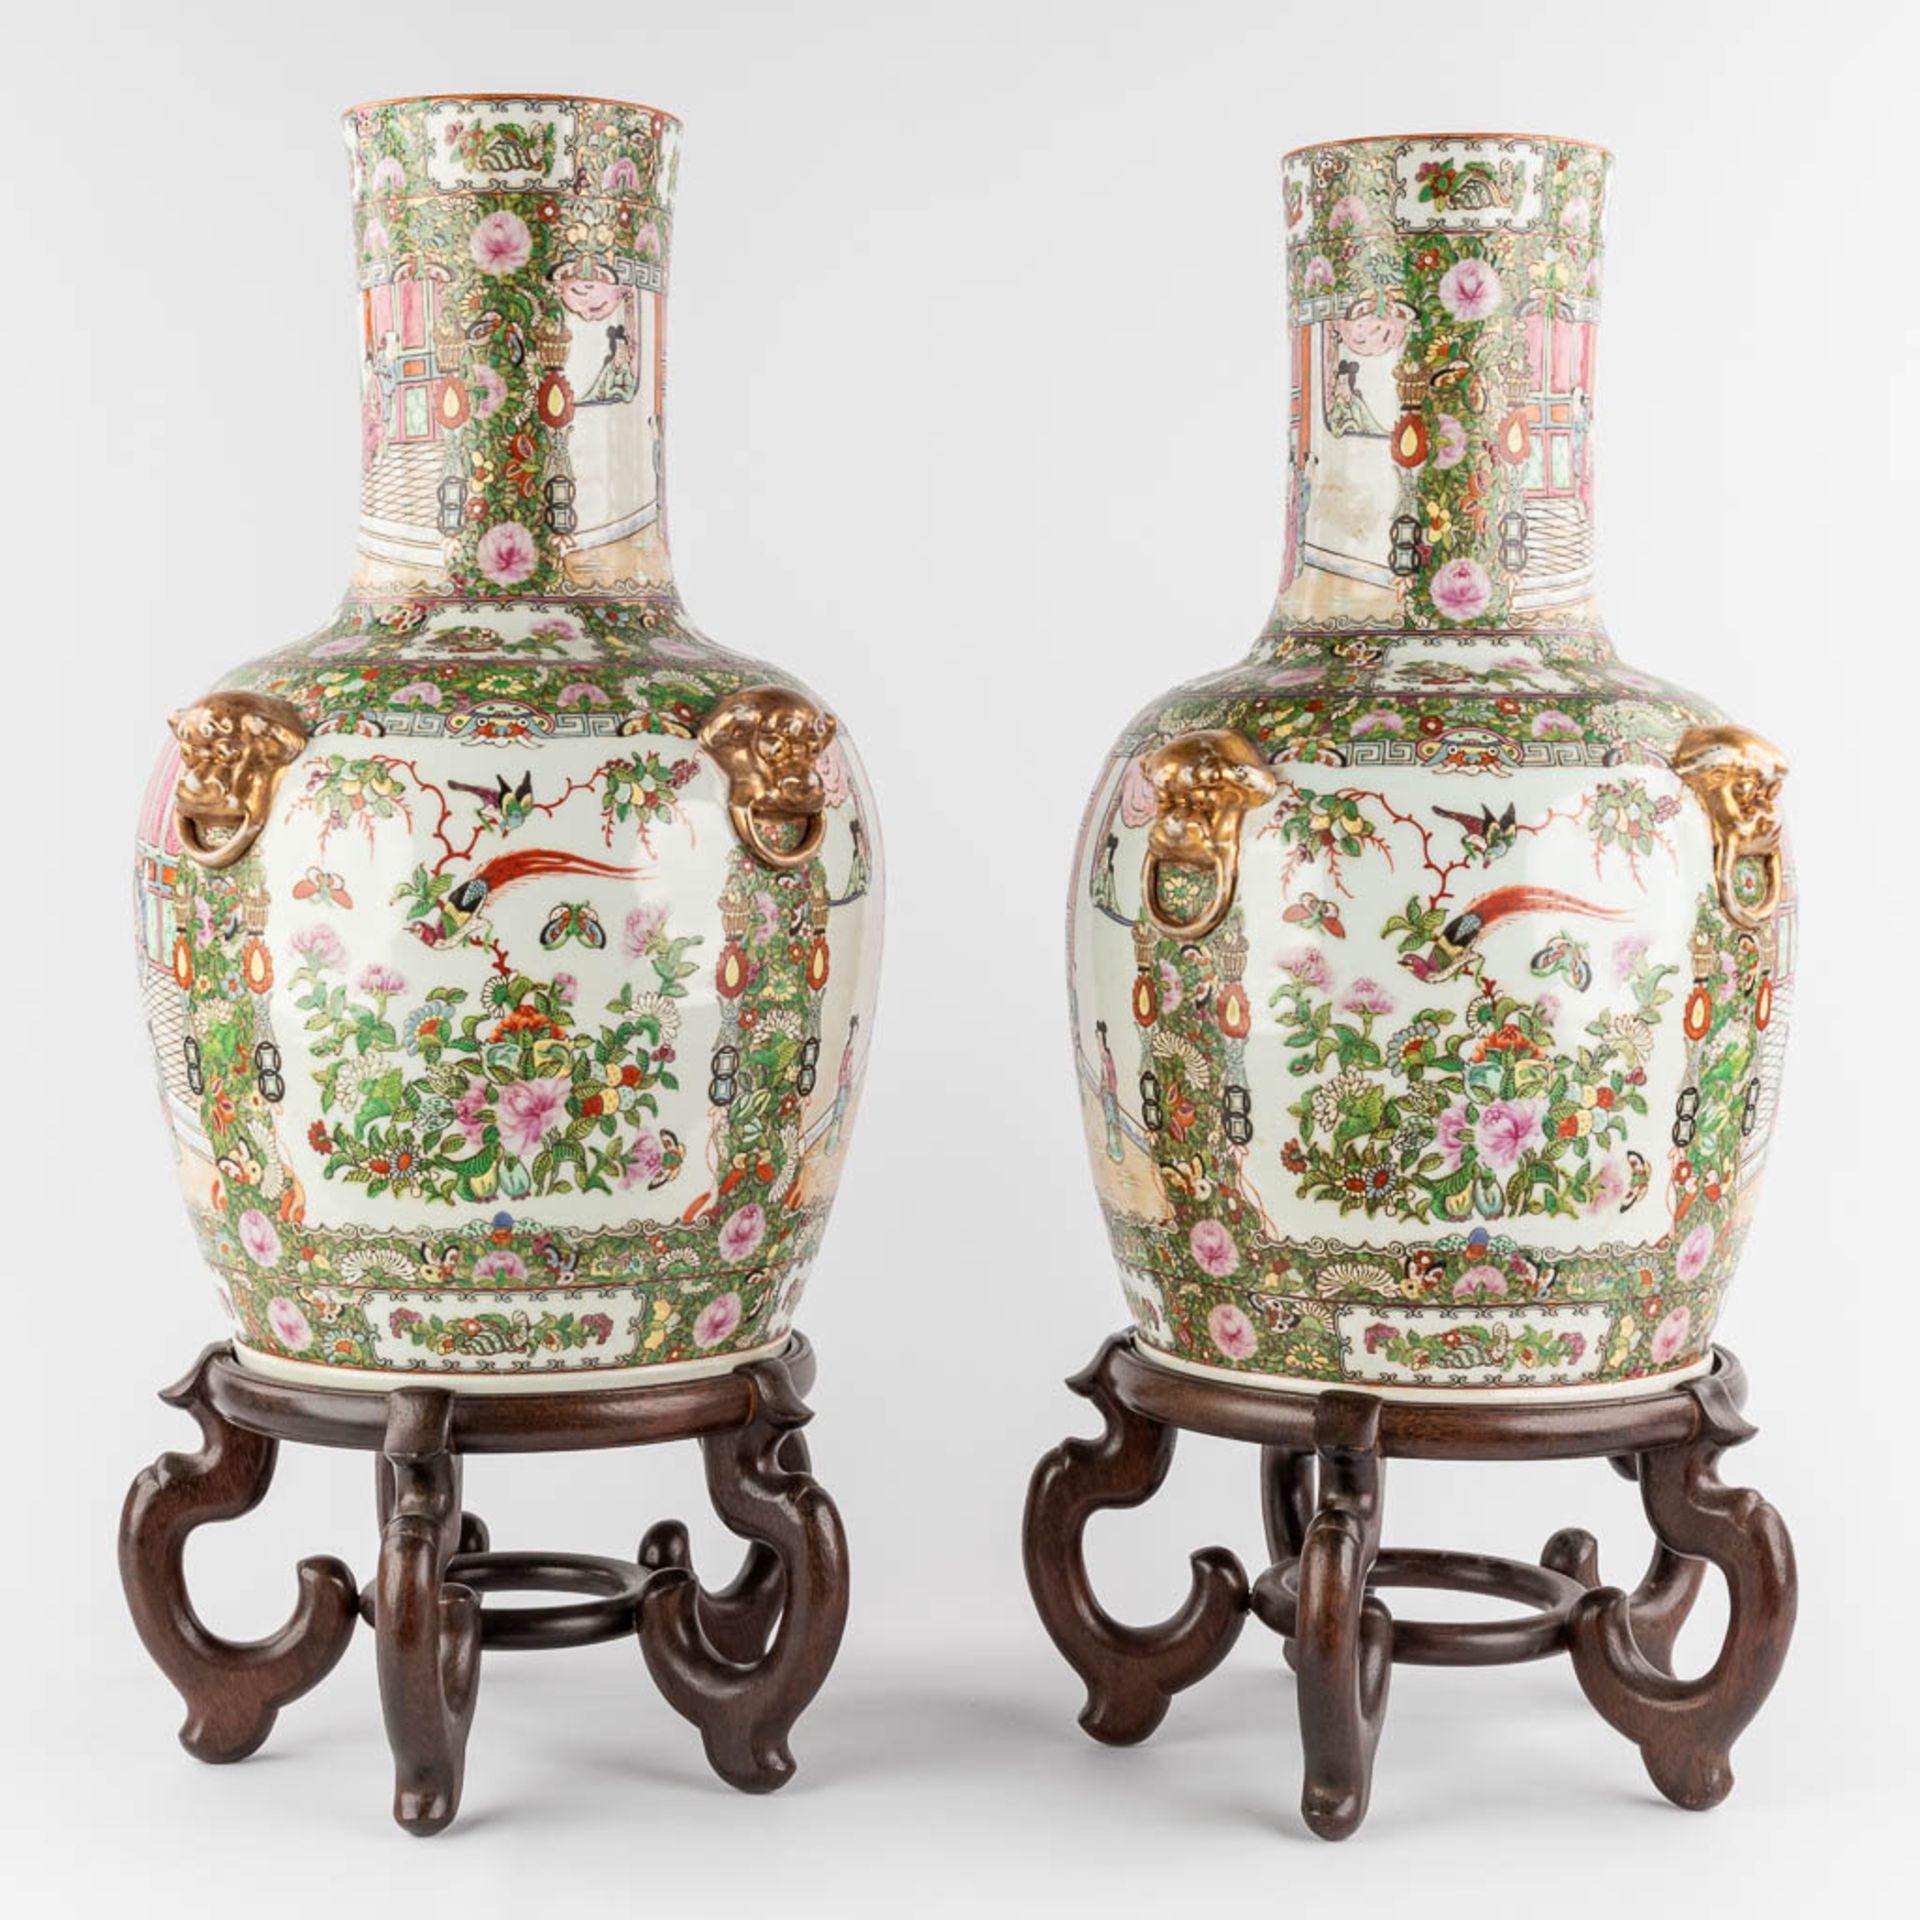 Two large Chinese Canton vases on a pedestal, 20th C. (H:50 x D:32 cm) - Image 4 of 15